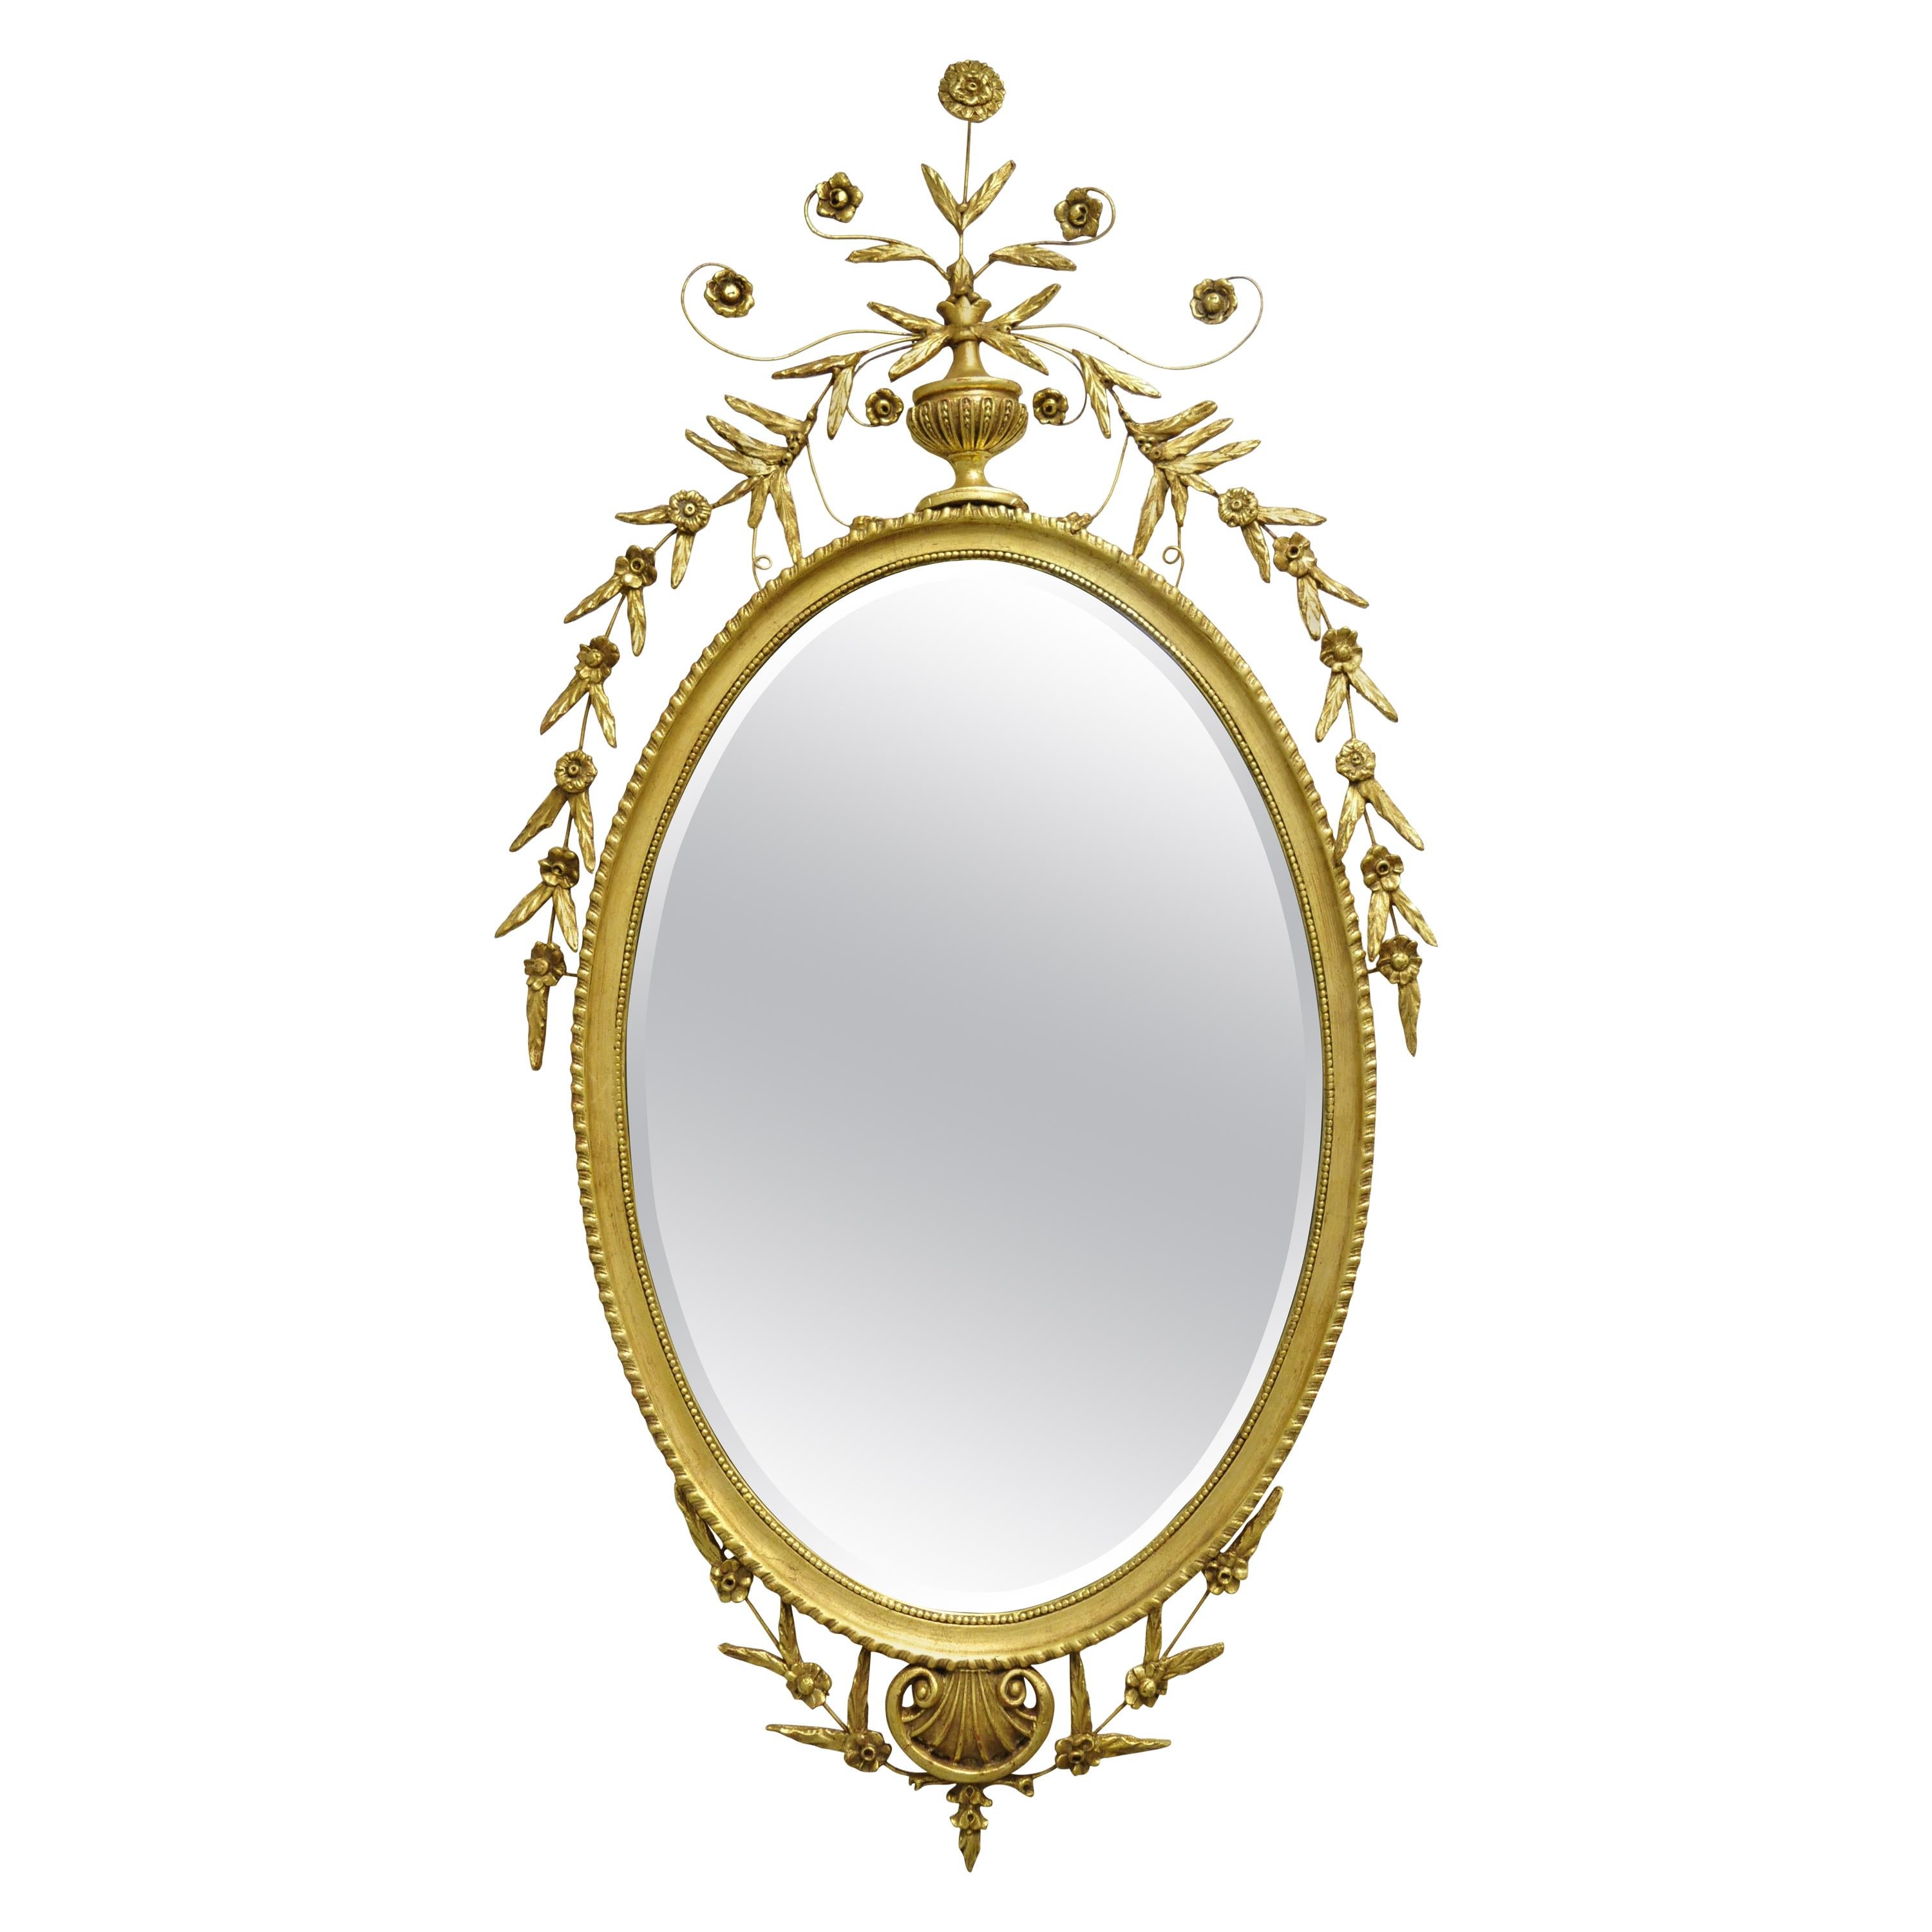 Friedman Brothers Large Oval Adams Style Gold Giltwood Wall Mirror For Sale